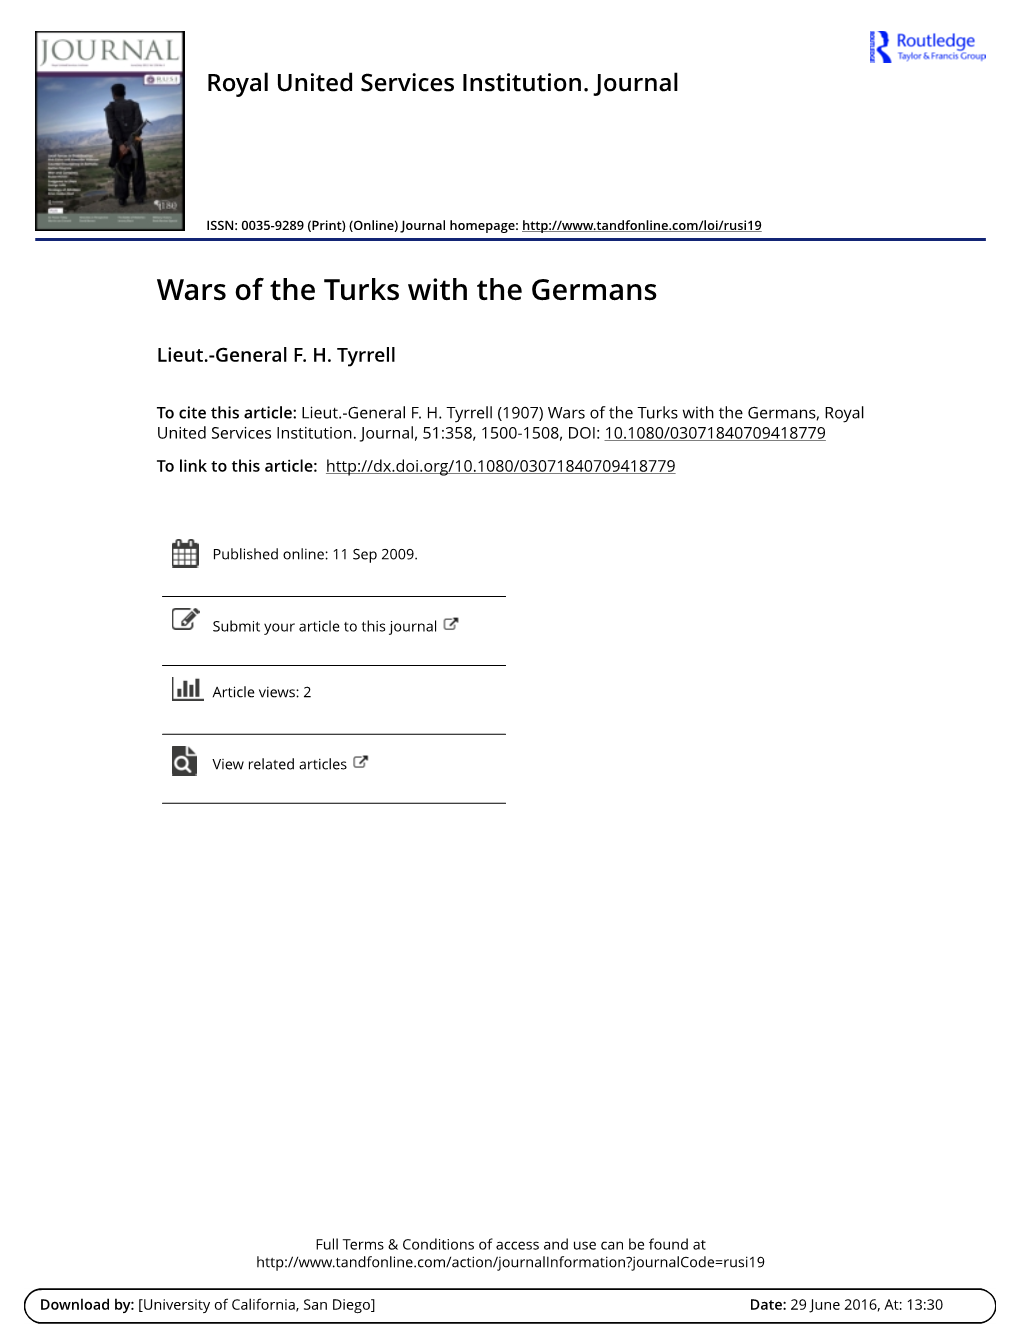 Wars of the Turks with the Germans